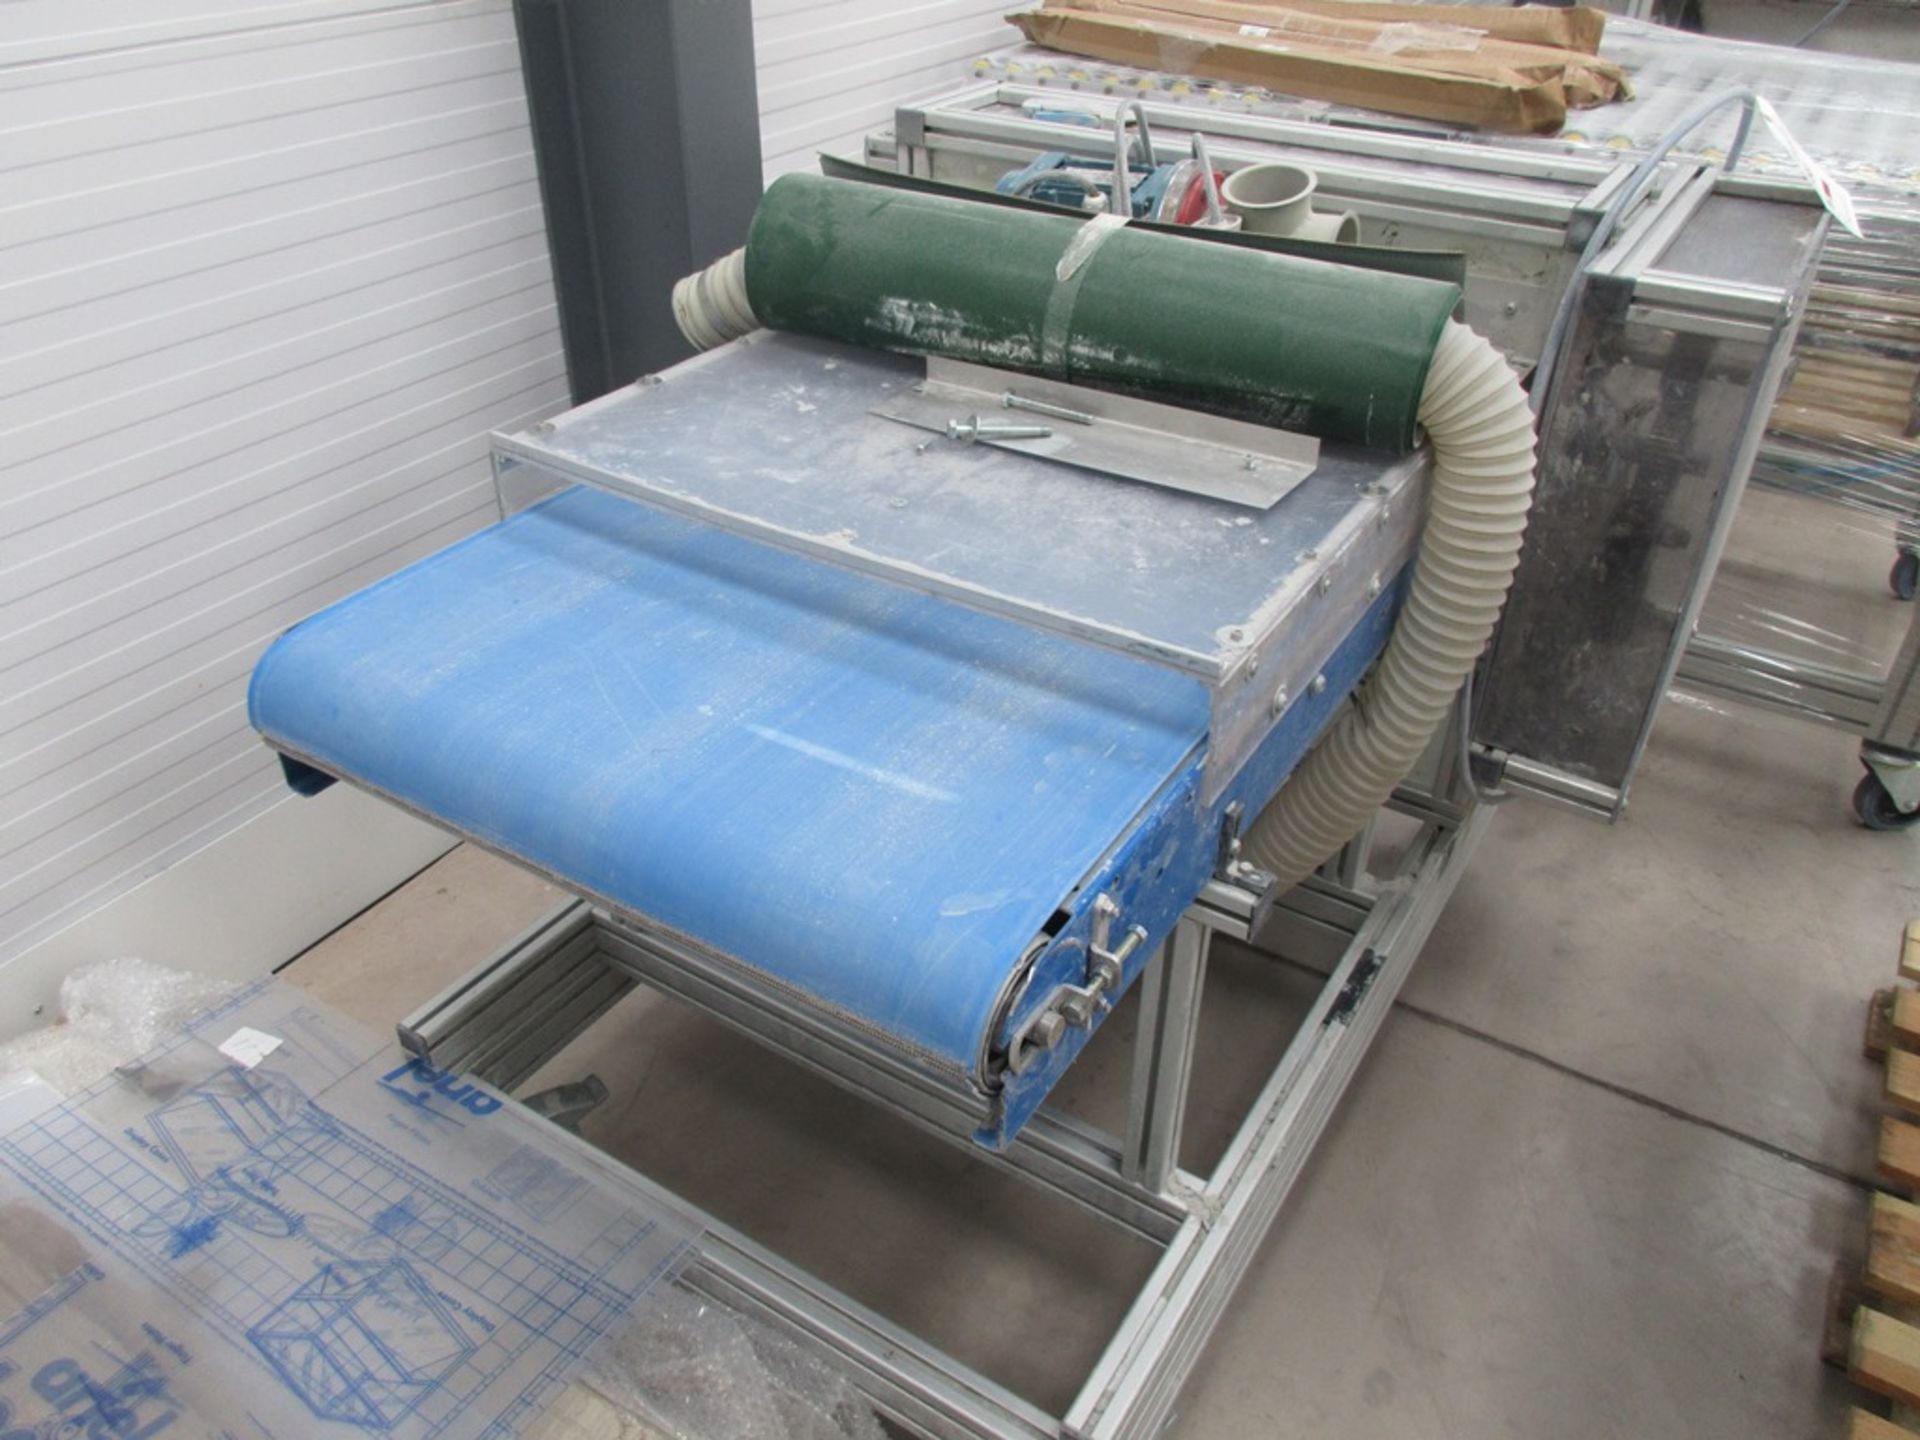 Un-named conveyor fed product masher, 650mm infeed belt conveyor, mash dimensions 700 x 200mm